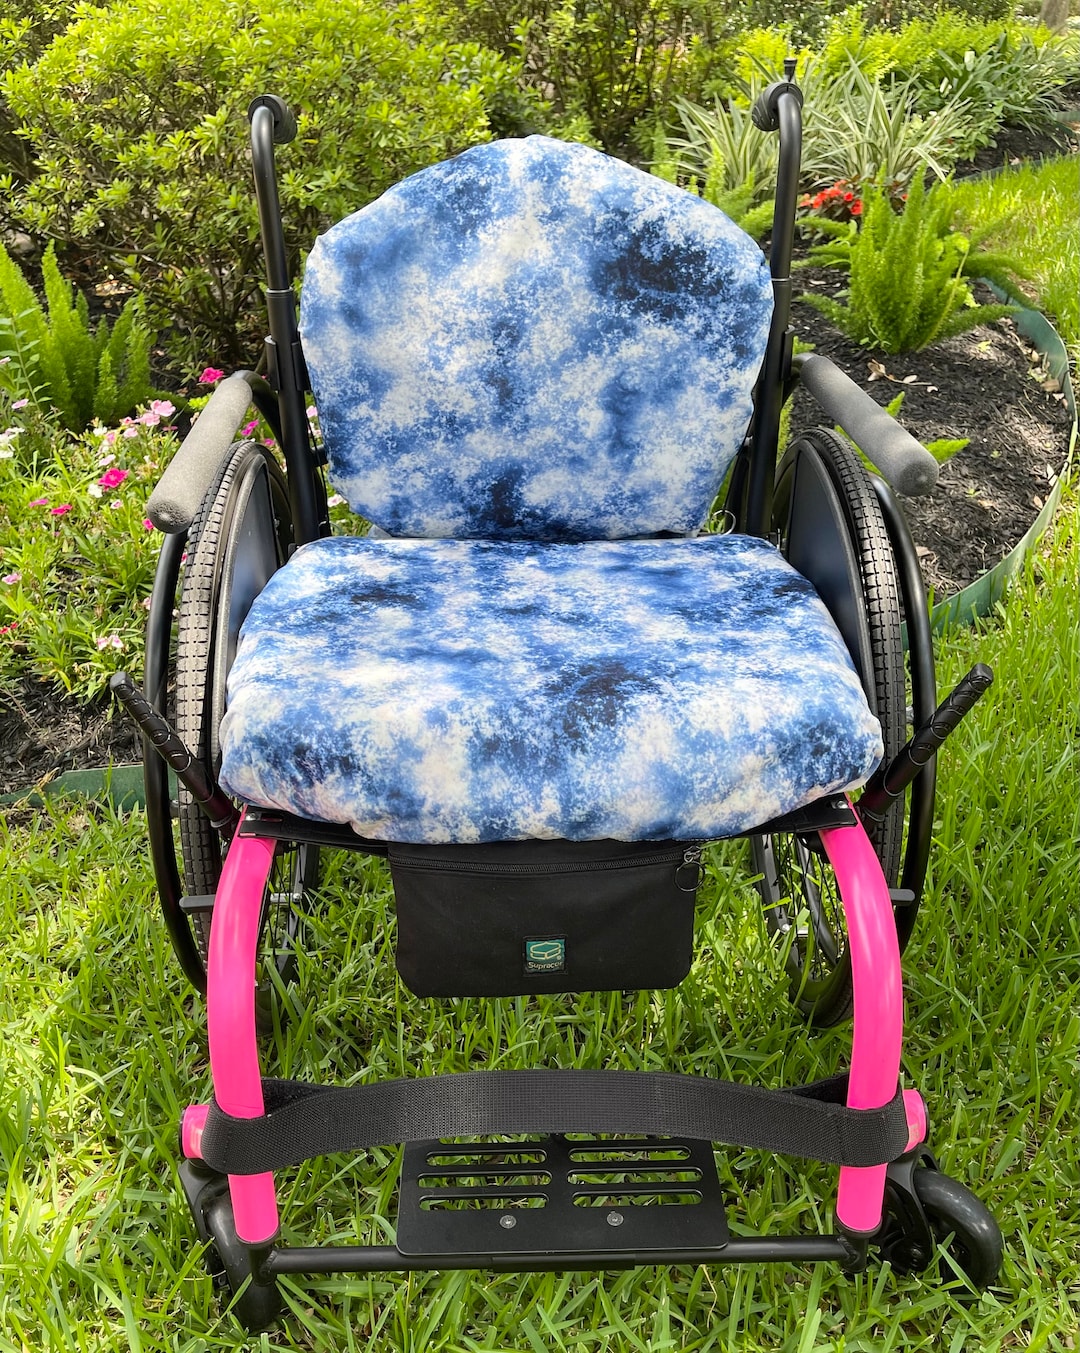 Mix and Match Waterproof Wheelchair Back / Seat Cushion Cover SAVE